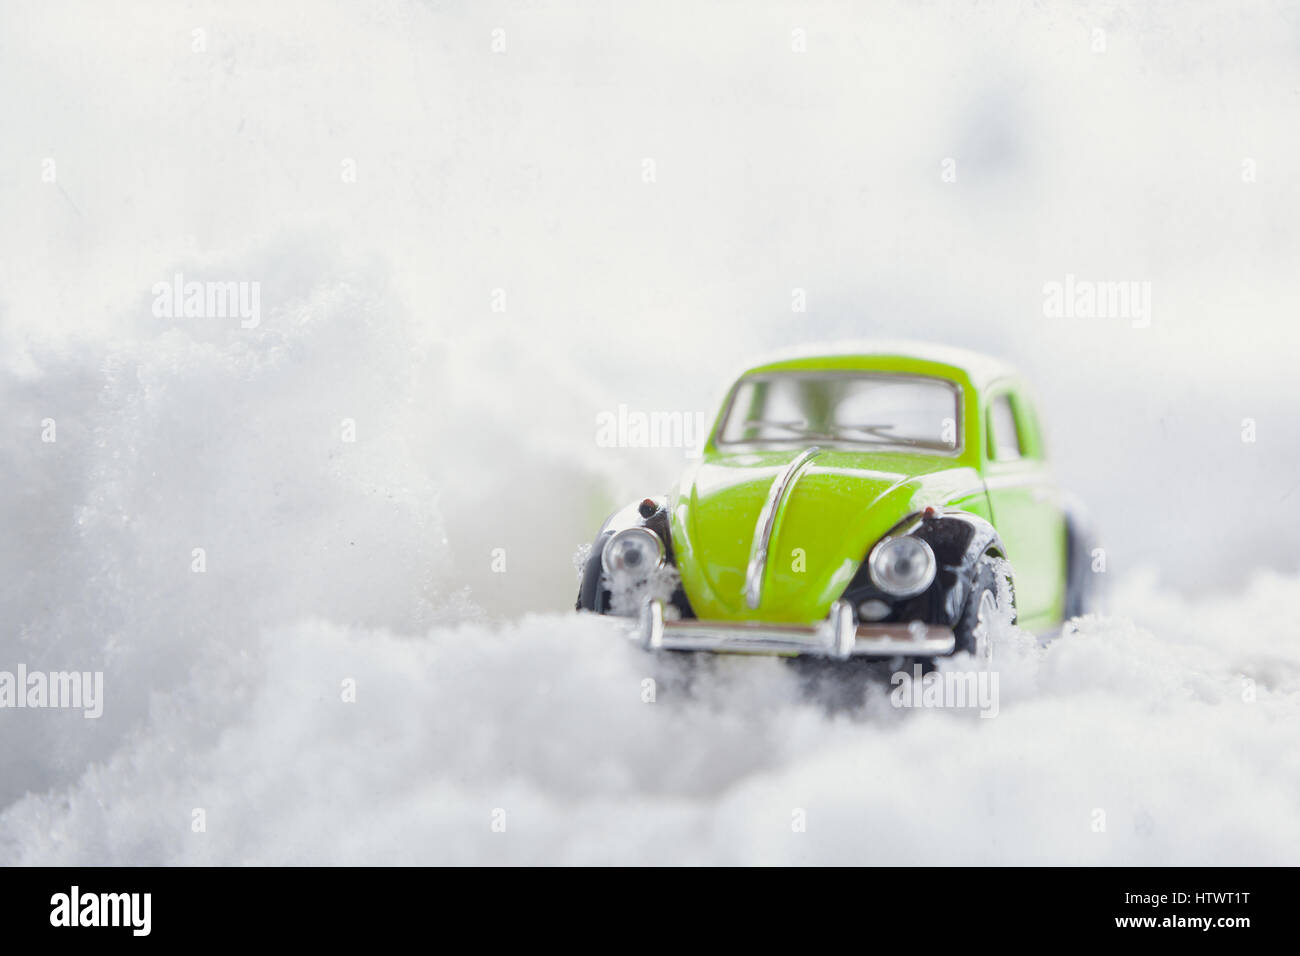 WOODBRIDGE, NEW JERSEY - March 14, 2017: A diecast toy Volkswagen Beetle stock in the snow Stock Photo